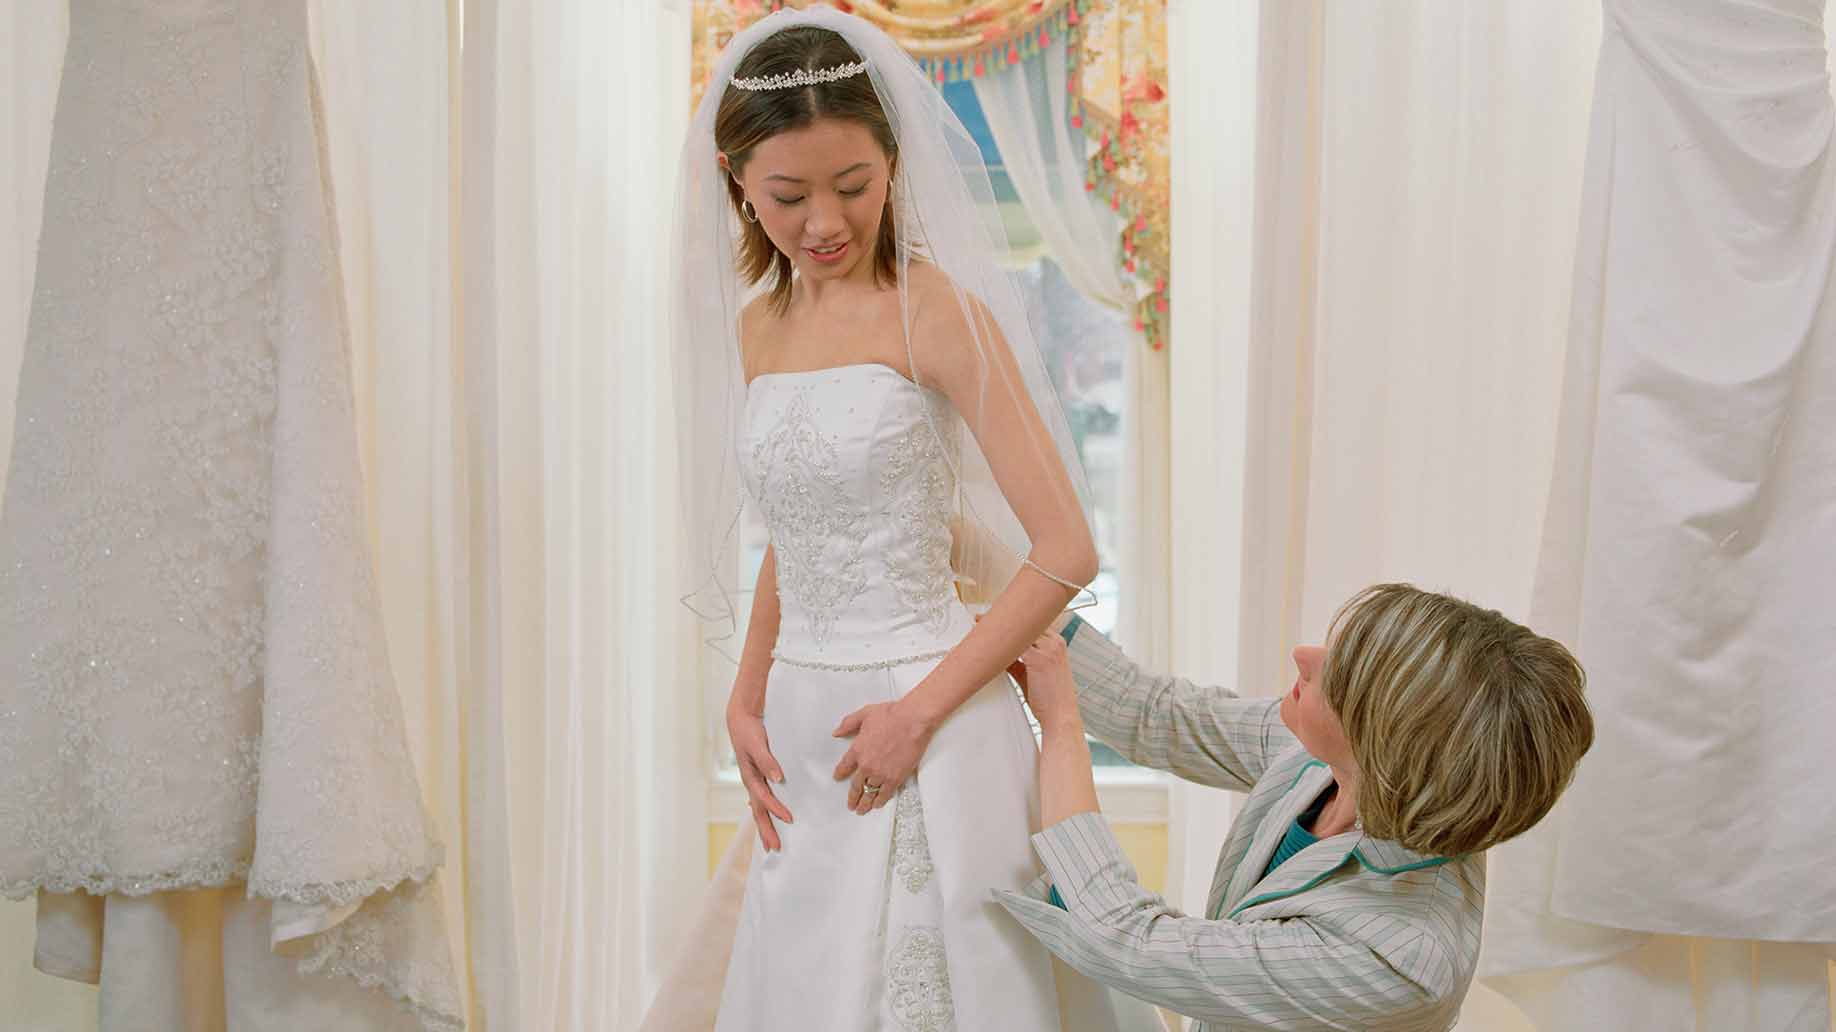 How Much Do Wedding Dress Alterations Cost - Prices